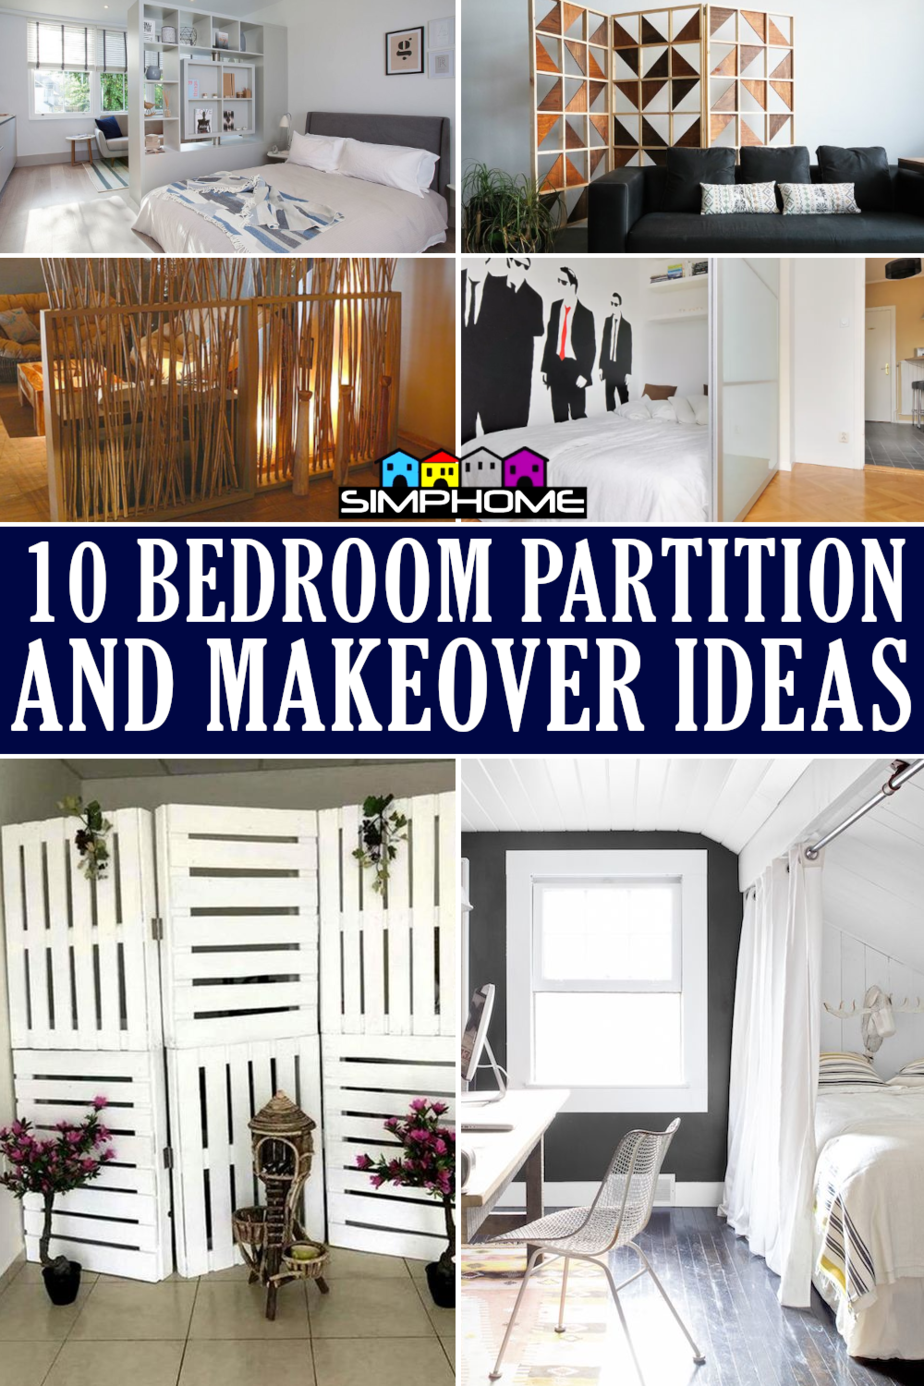 bedroom partitions and makeover ideas via simphome.com featured image